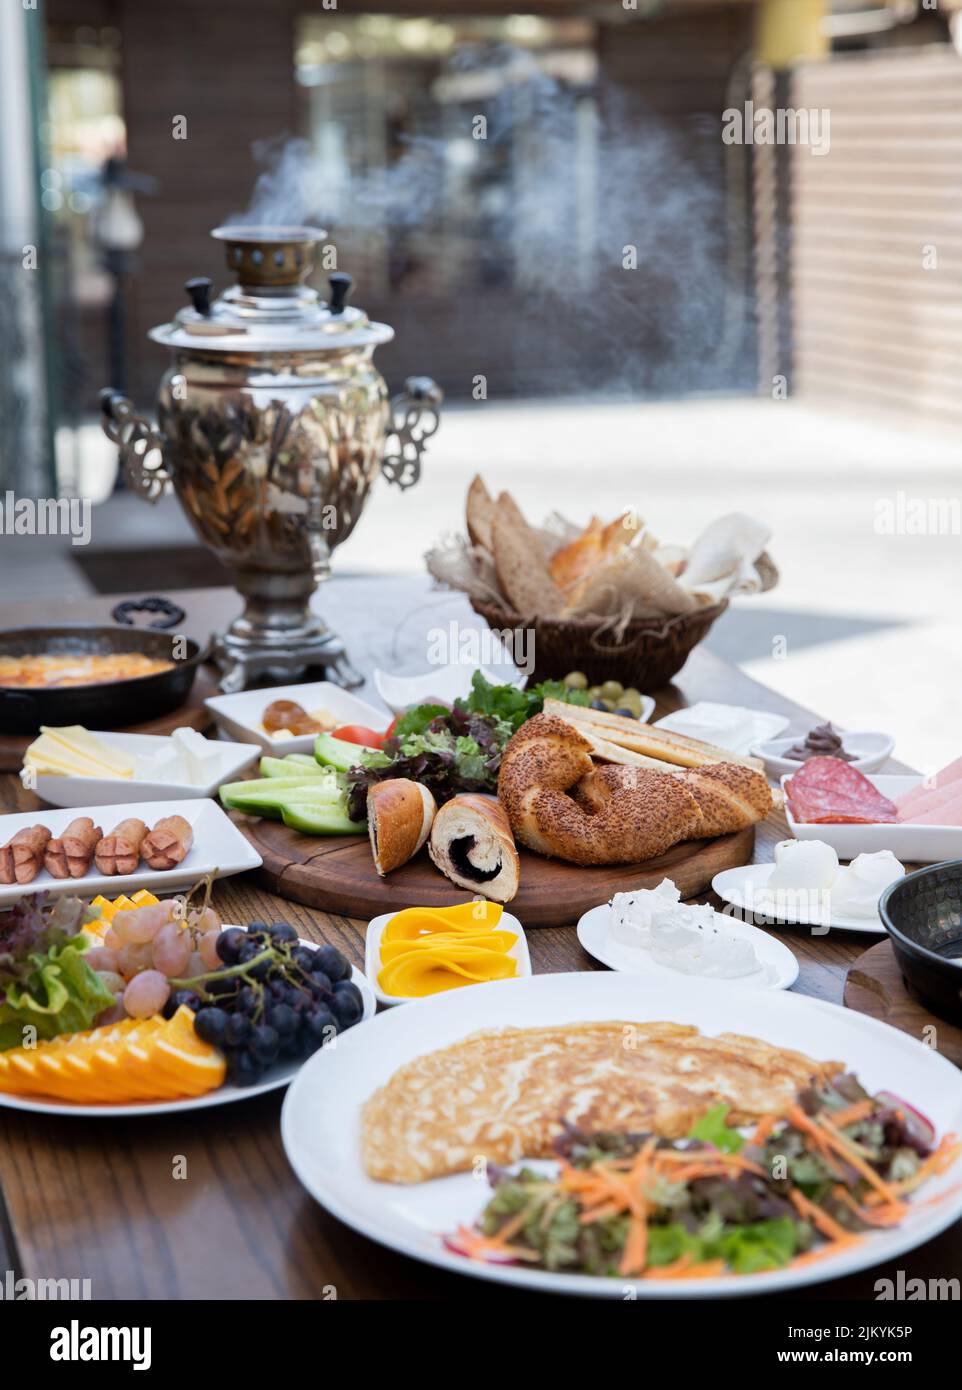 A vertical shot of a full breakfast table with eggs, cheese, bread, and a Russian samovar Stock Photo